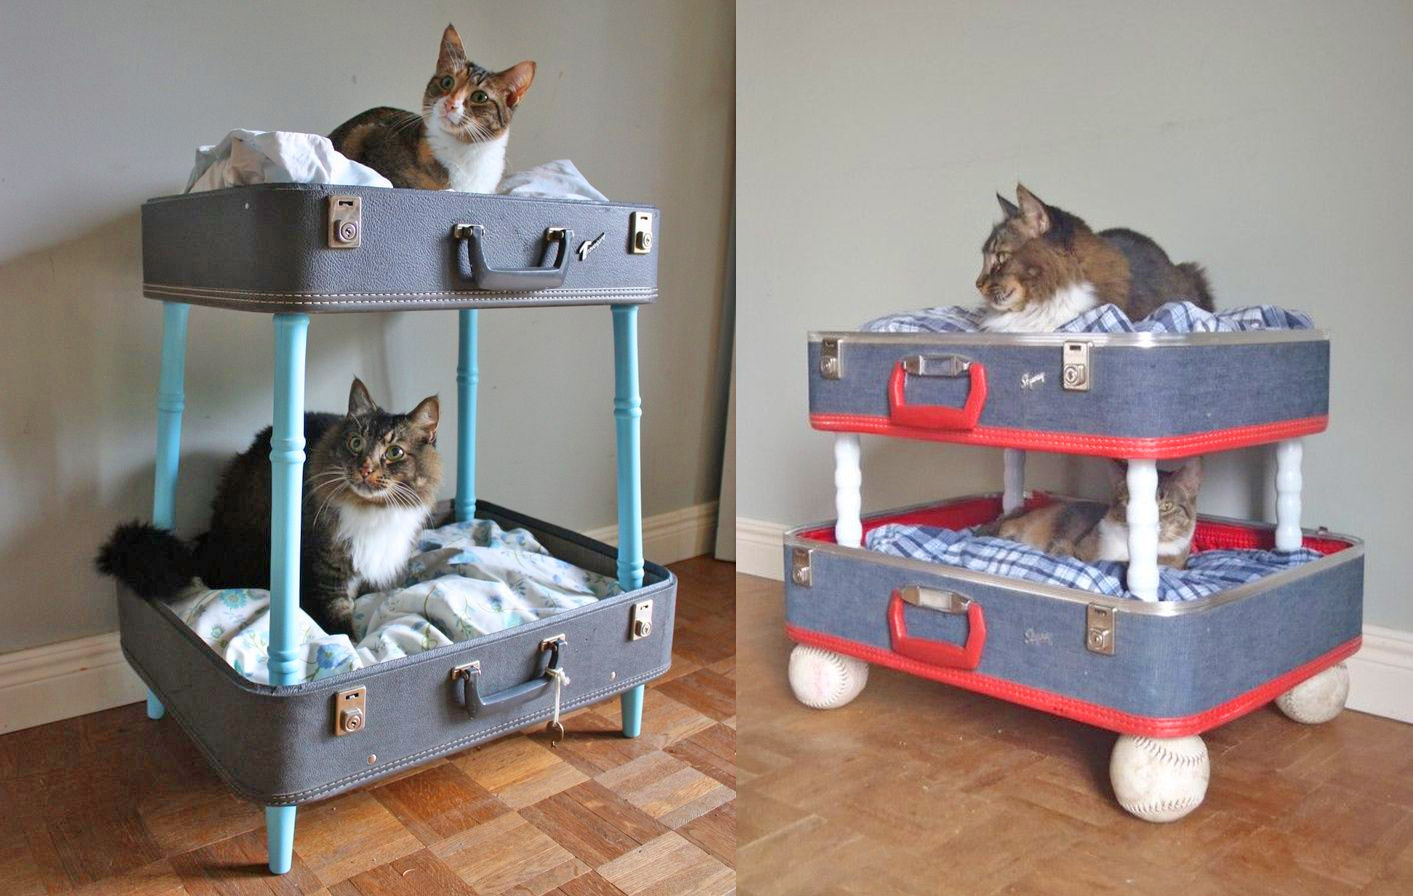 Suitcase Cat Bed Free Delivery, Cat Bunk Beds Diy